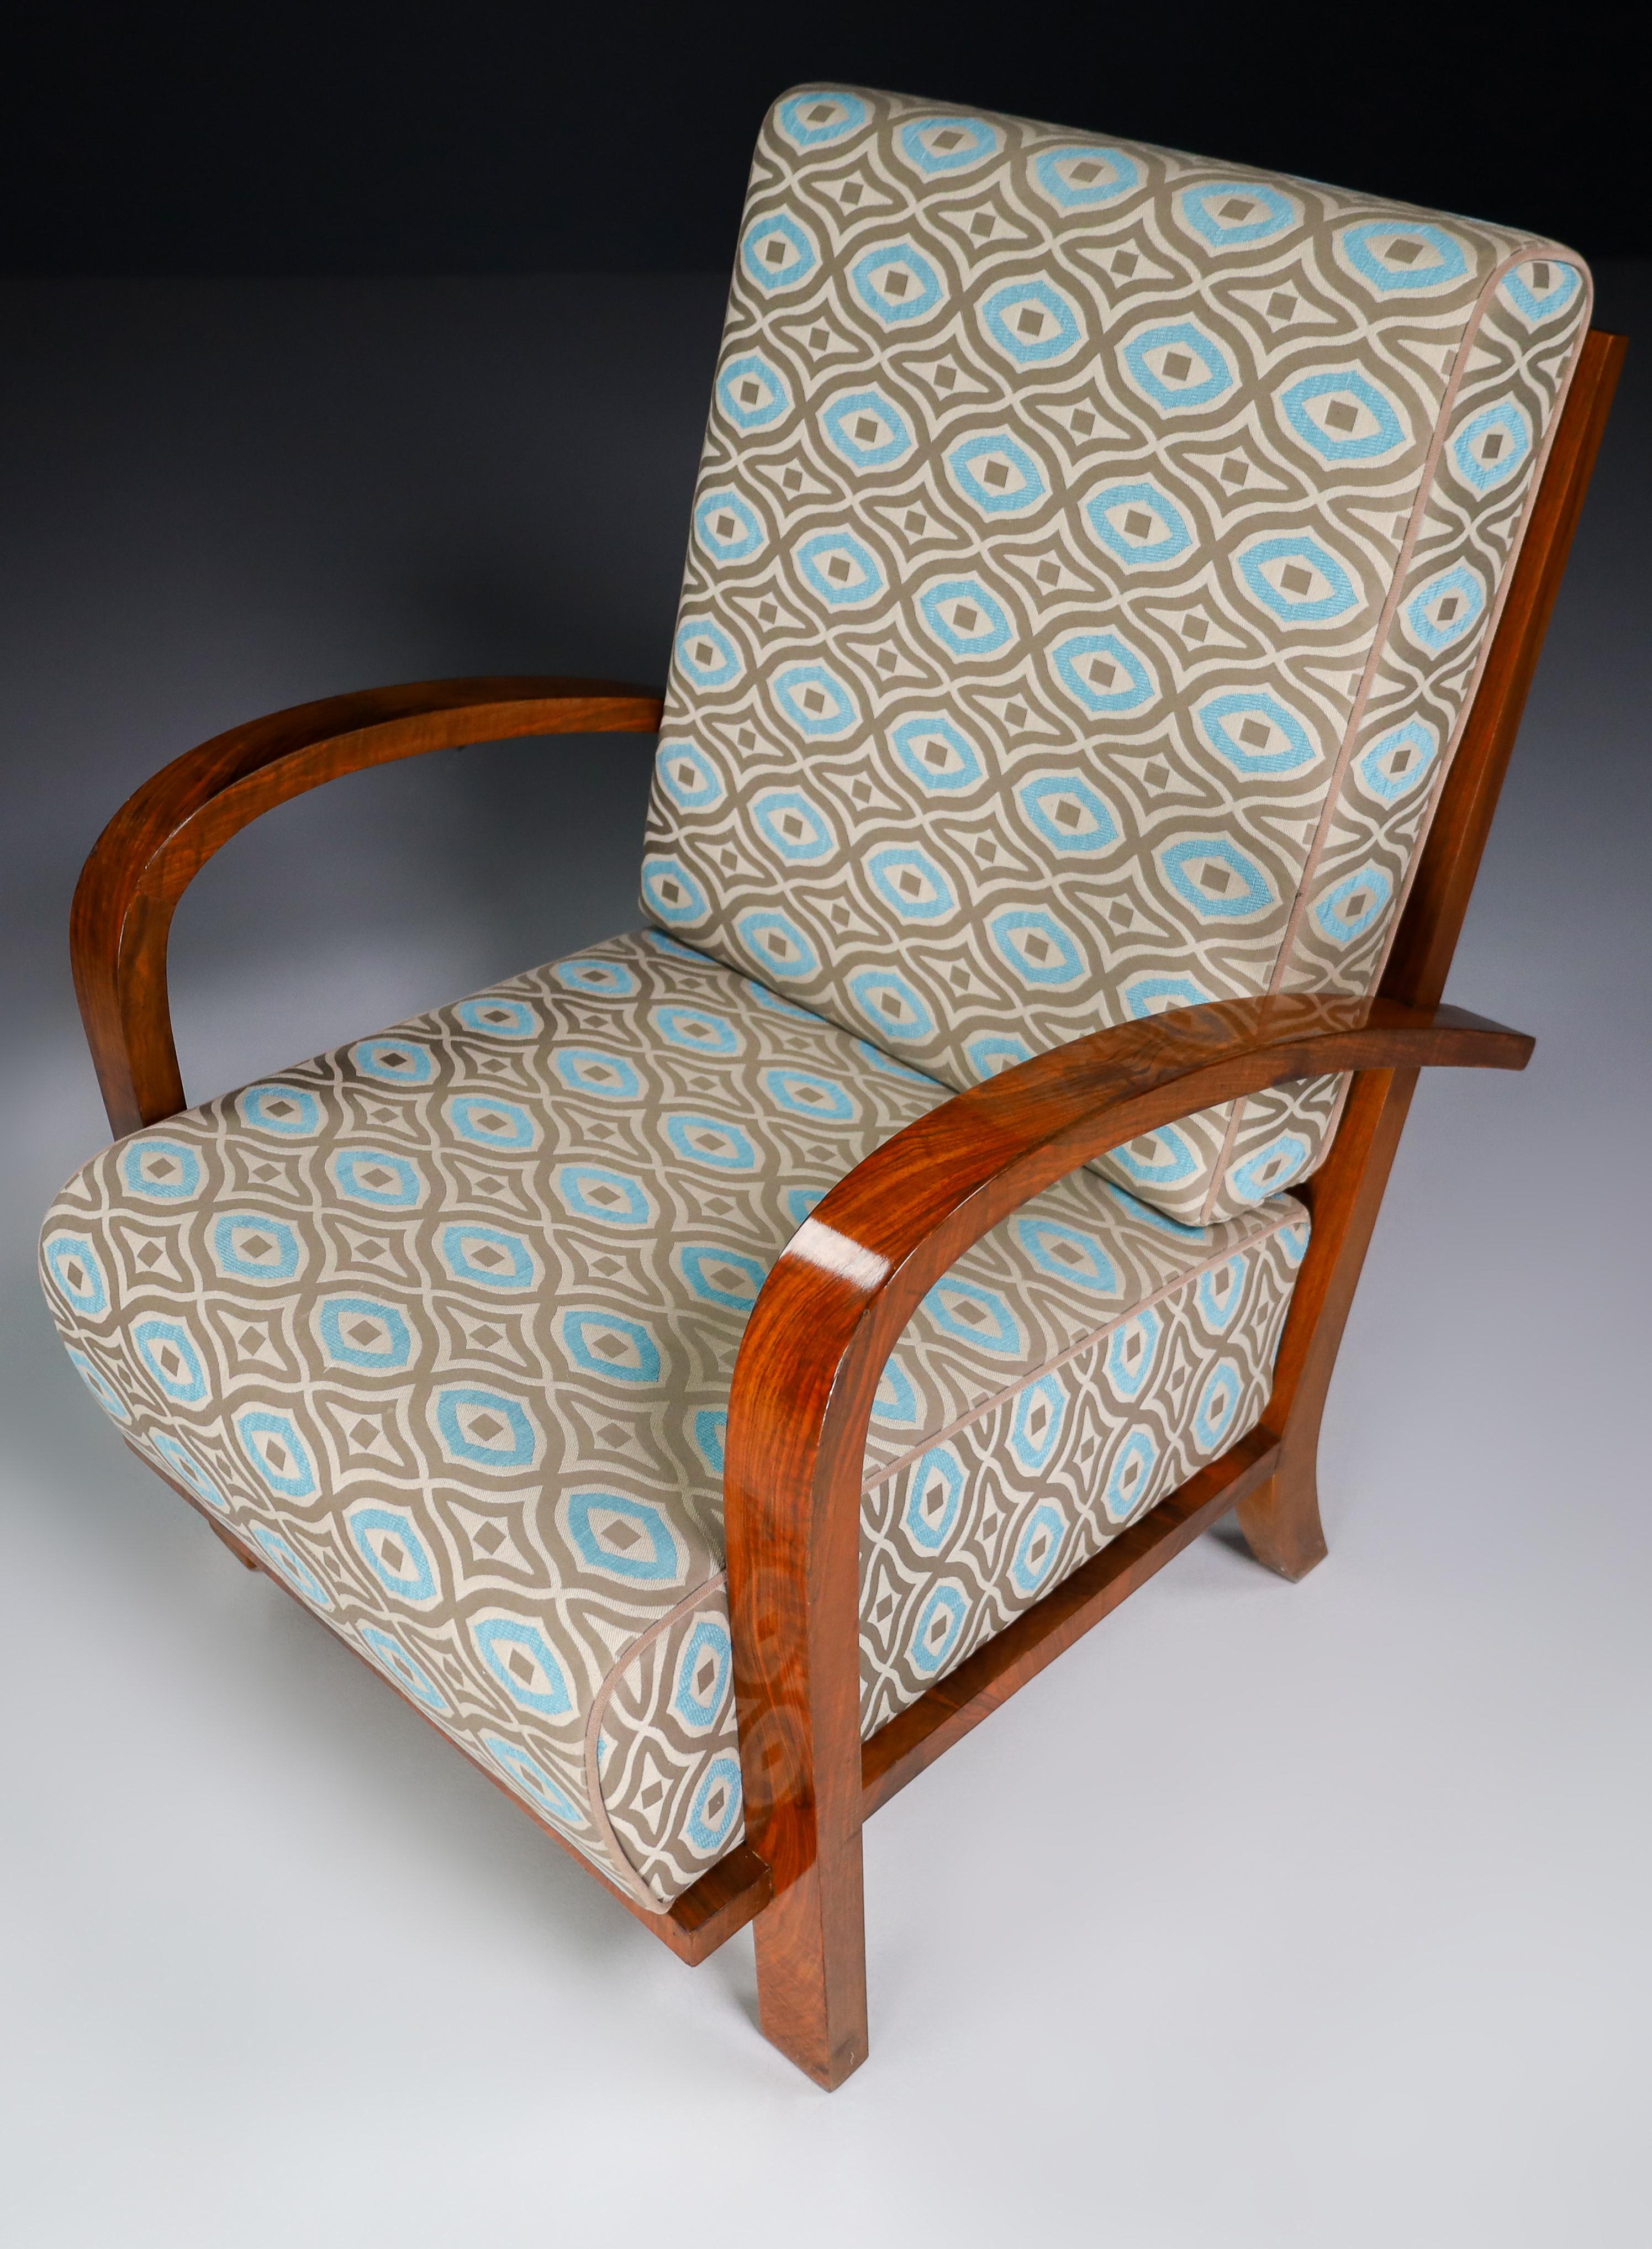 Art Deco Art-Deco Walnut Armchairs in Reupholstered in Fabric, Praque, 1930s For Sale